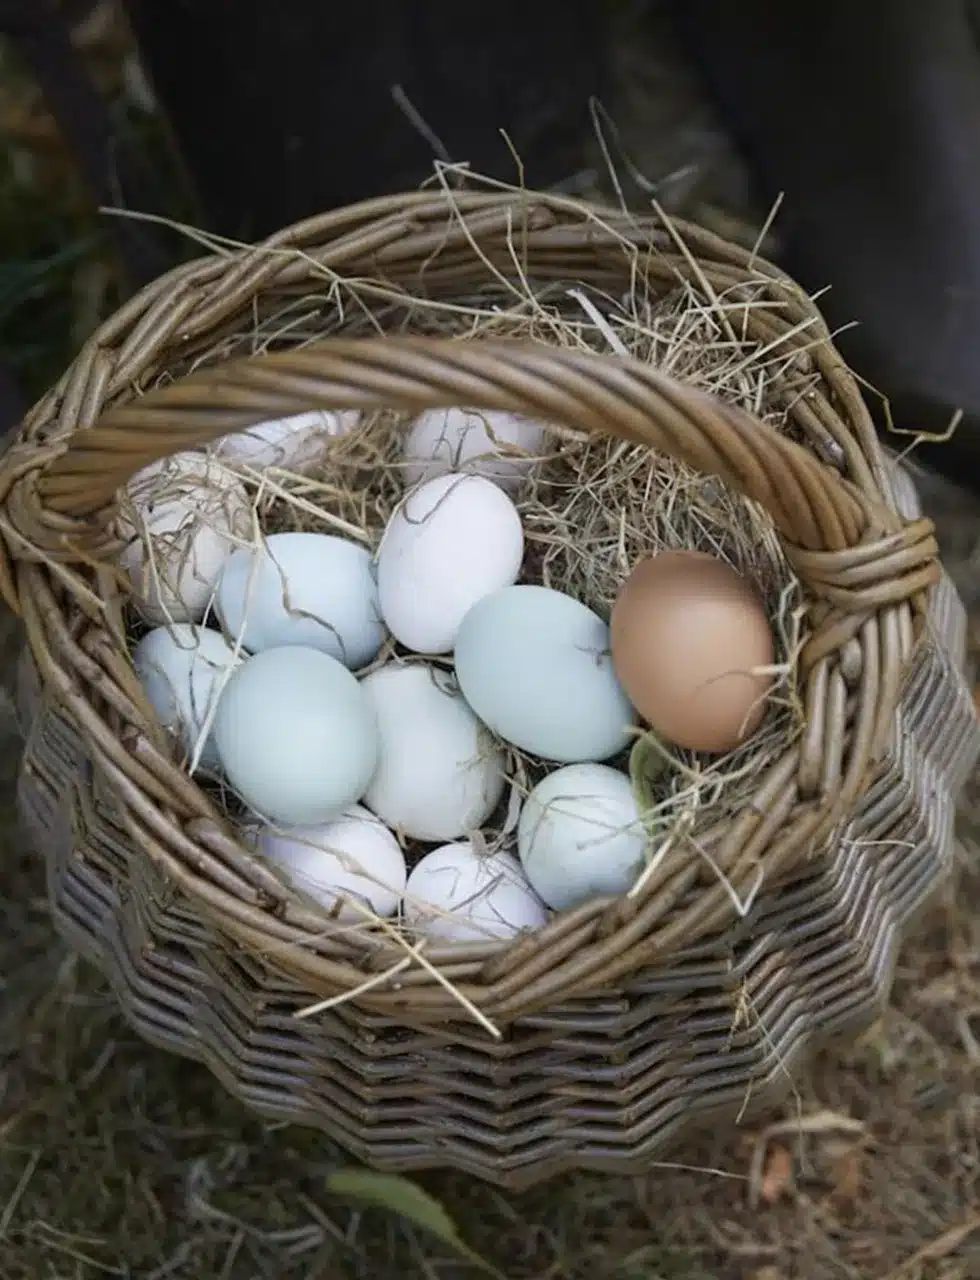 Eggs in a basket, its important to have clean and functional interiors